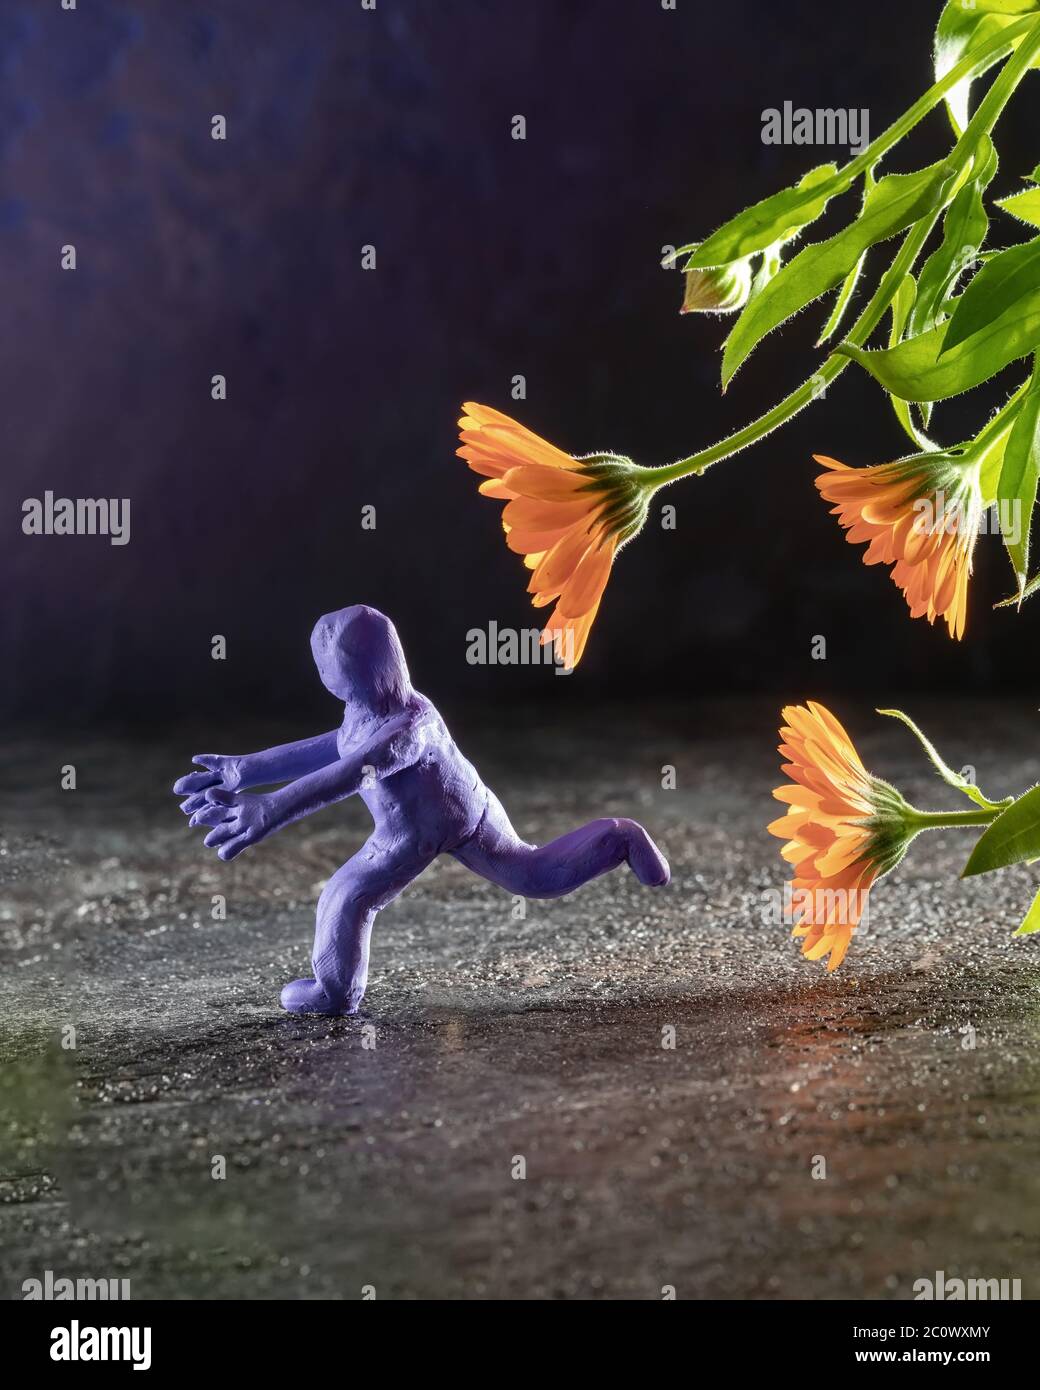 Play-doh character running away from calendula flowers reaching out for him Stock Photo